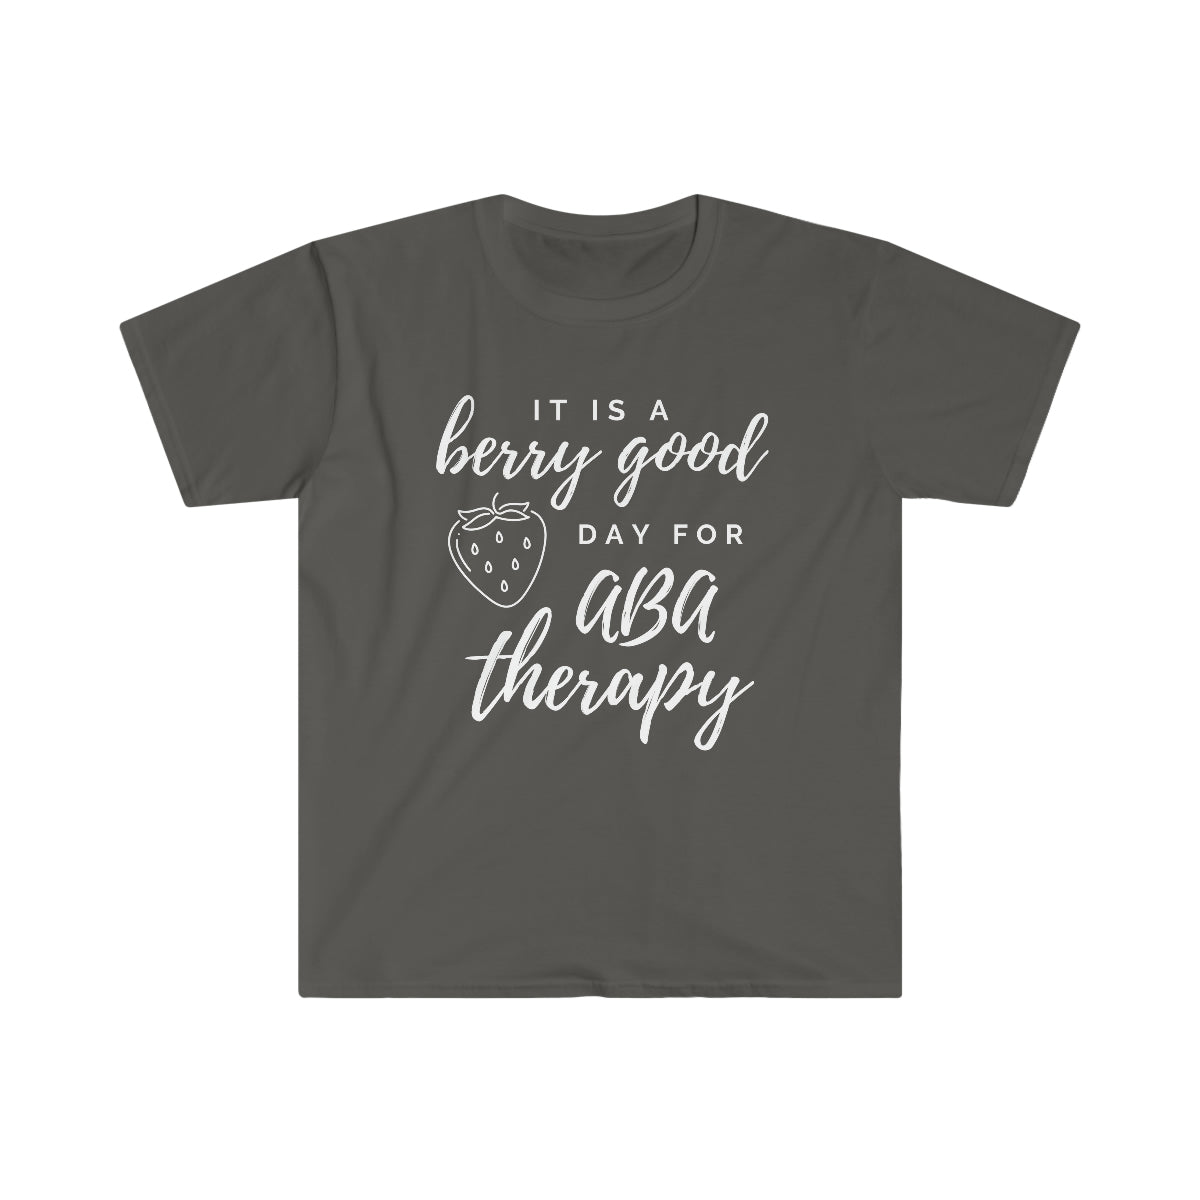 It's A Berry Good Day For ABA Therapy Shirt | Applied Behavior Analysis | Autism awareness | behavior analyst | behavior therapist